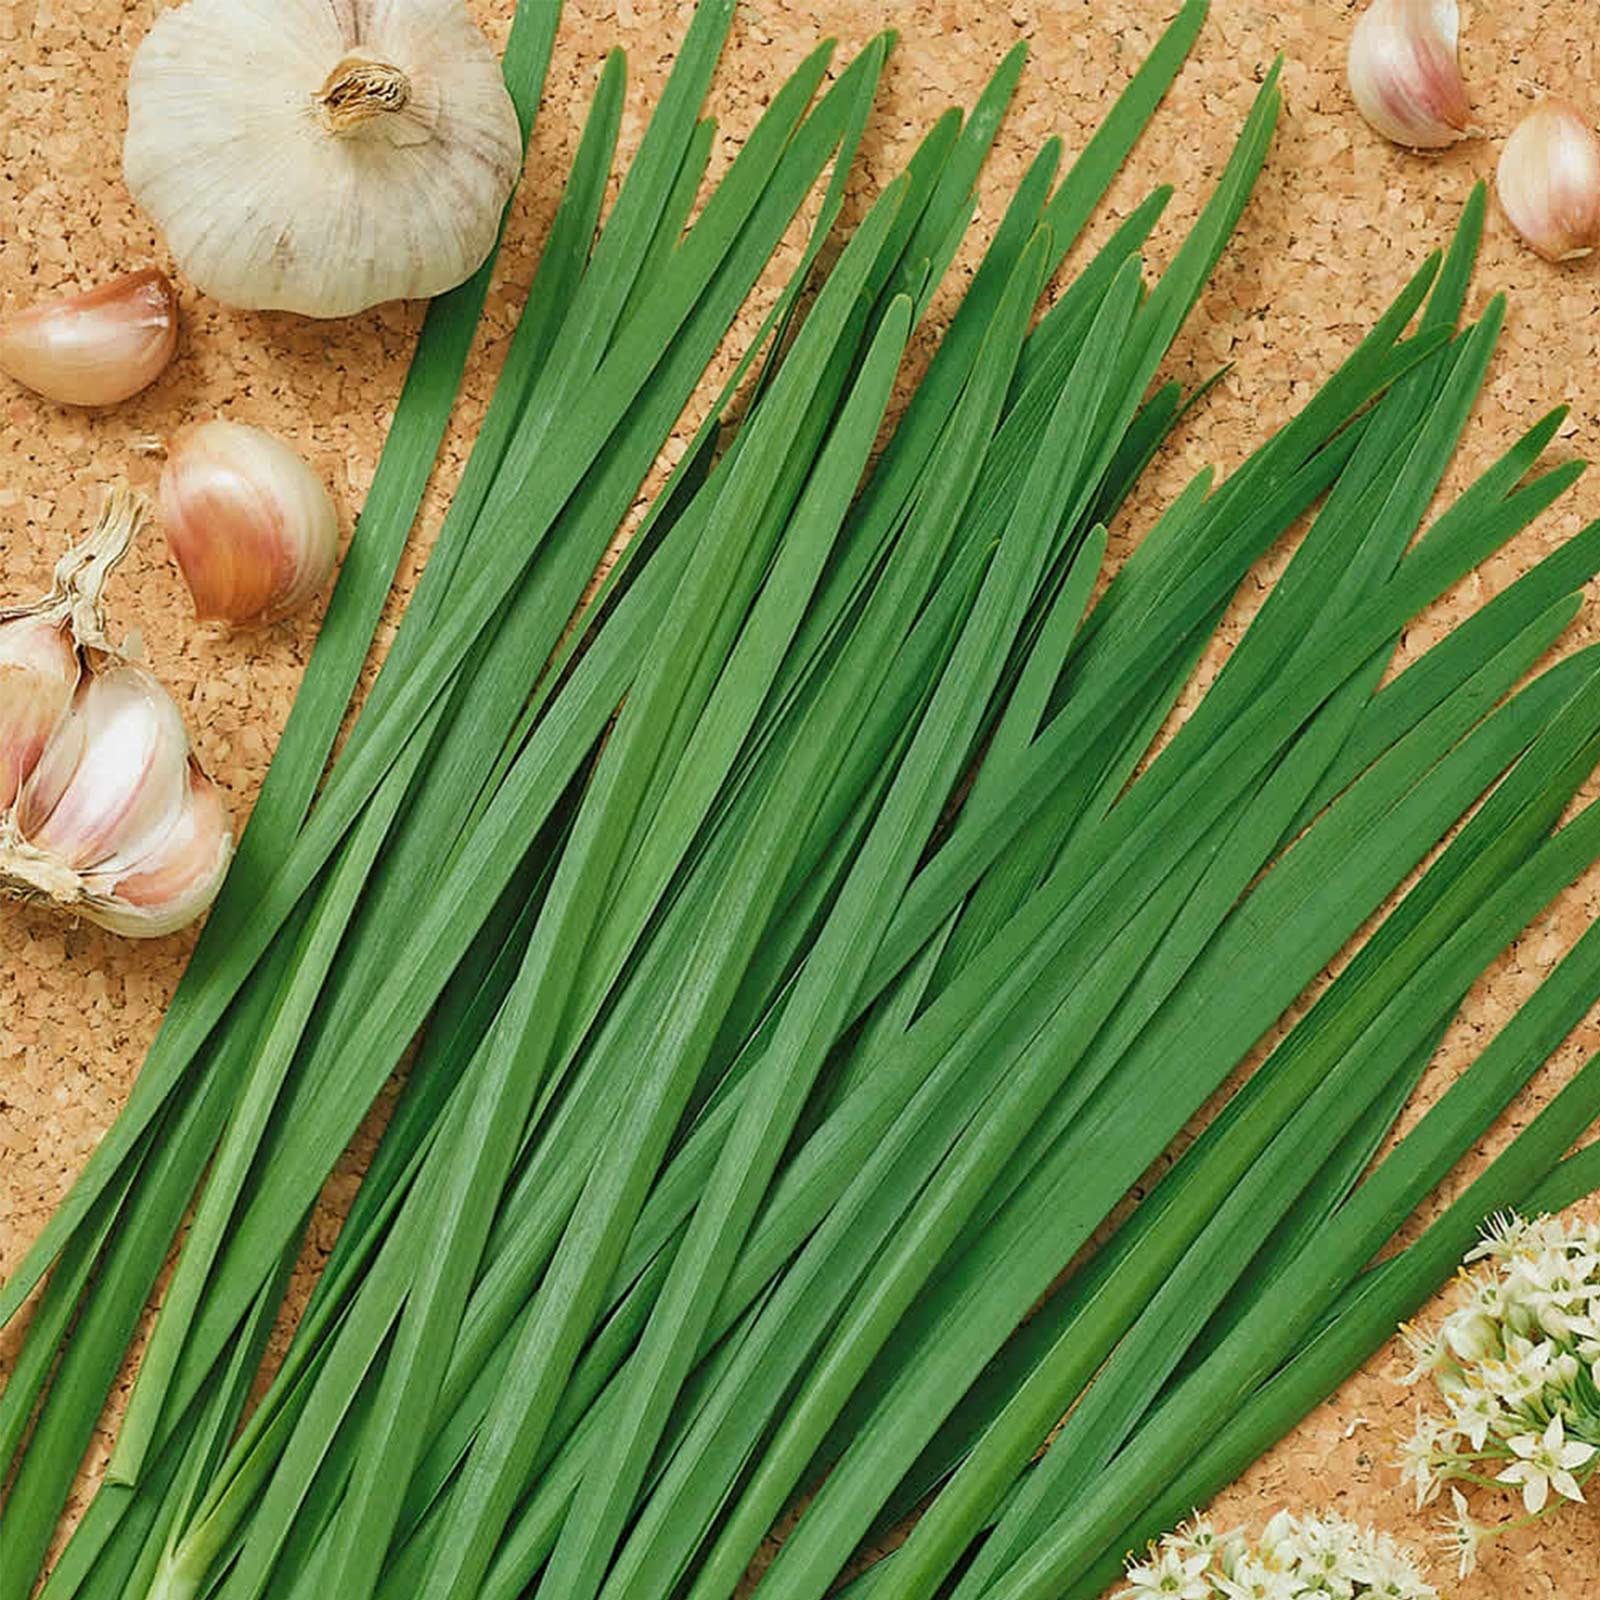 Garlic Chives 50 Organic Seeds Cooking Culinary Herbs Healthy Vegetable